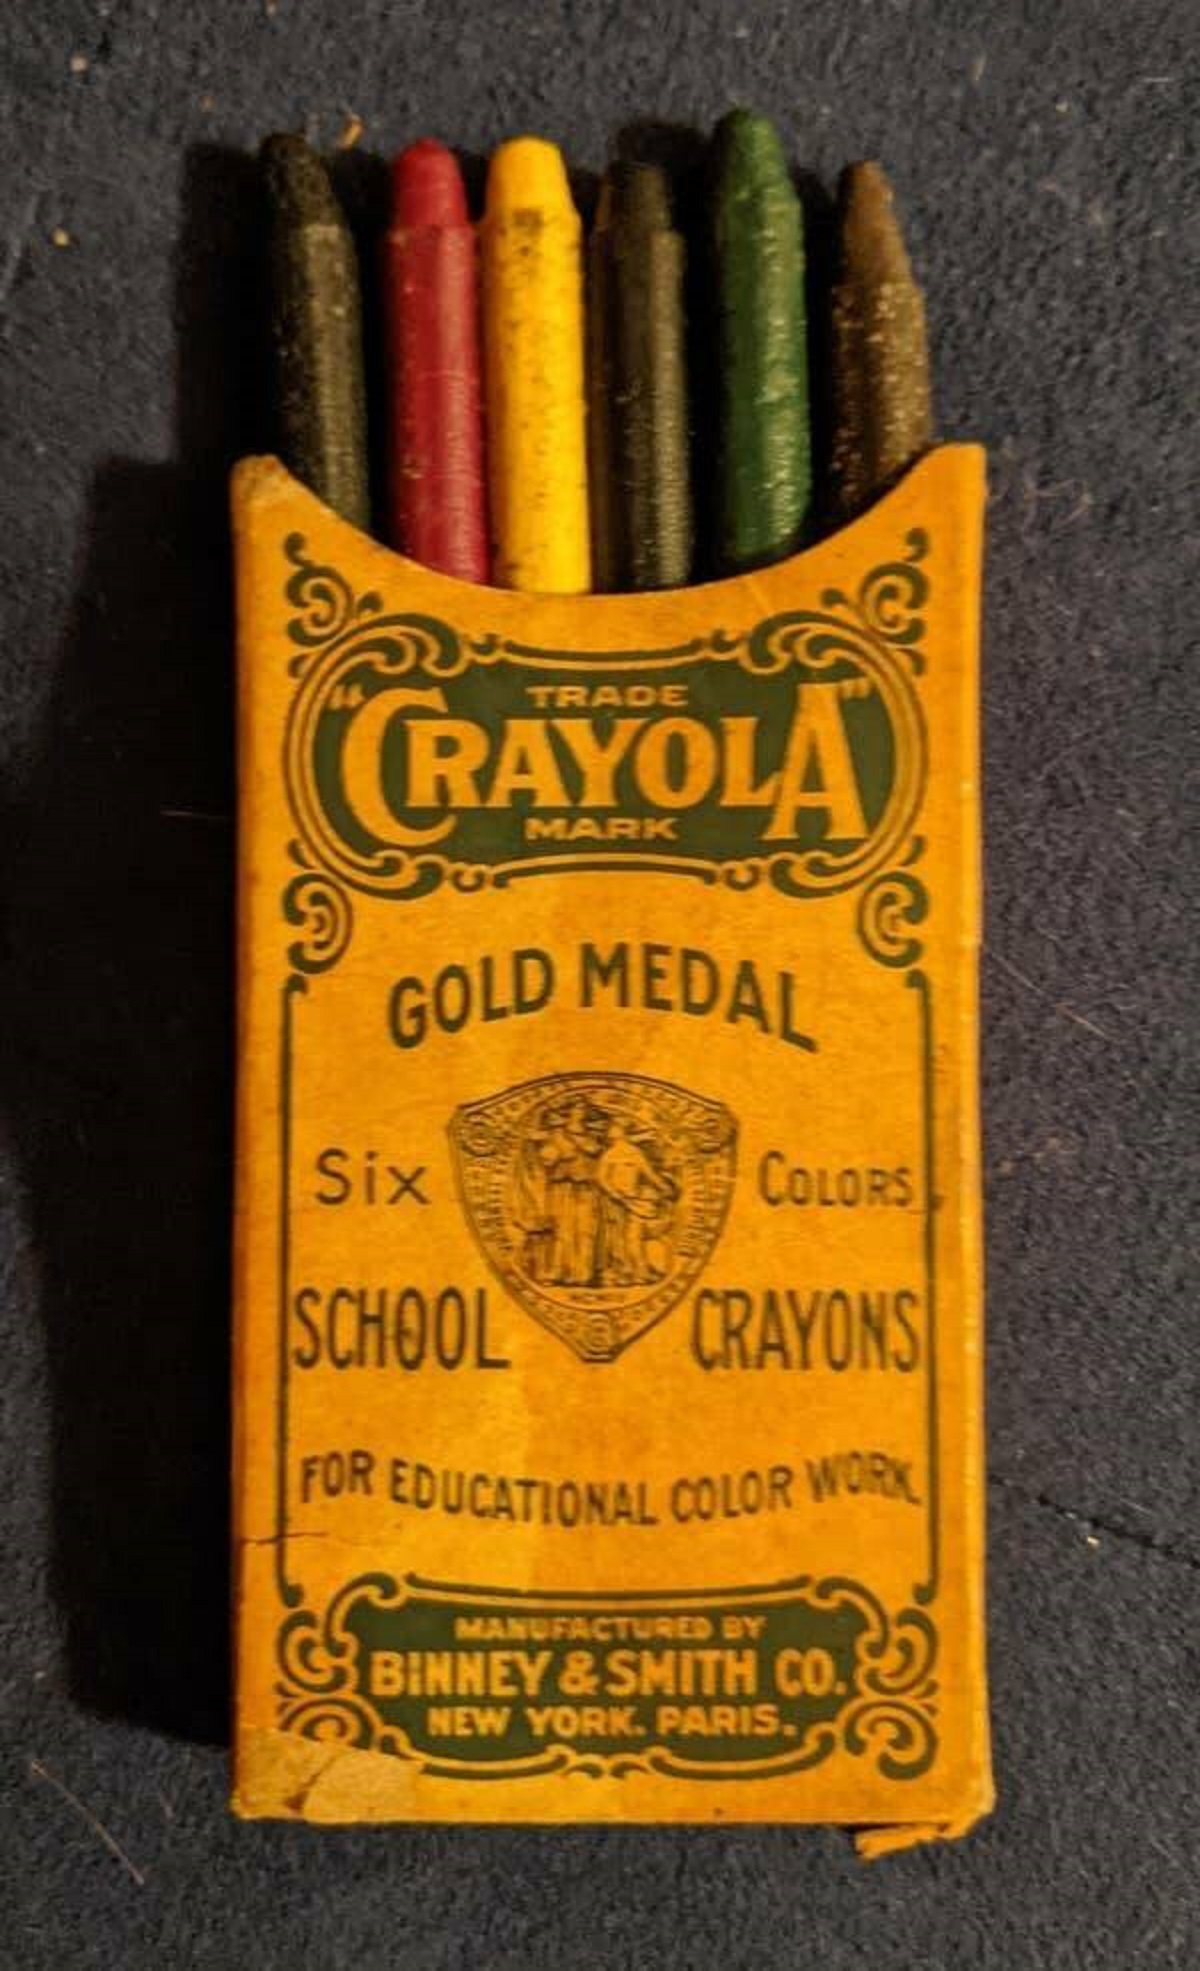 Crayola Gold Medal Six Colors School Crayons For Educational Color Work Manufactured By Binney&Smith Co. New York. Paris.